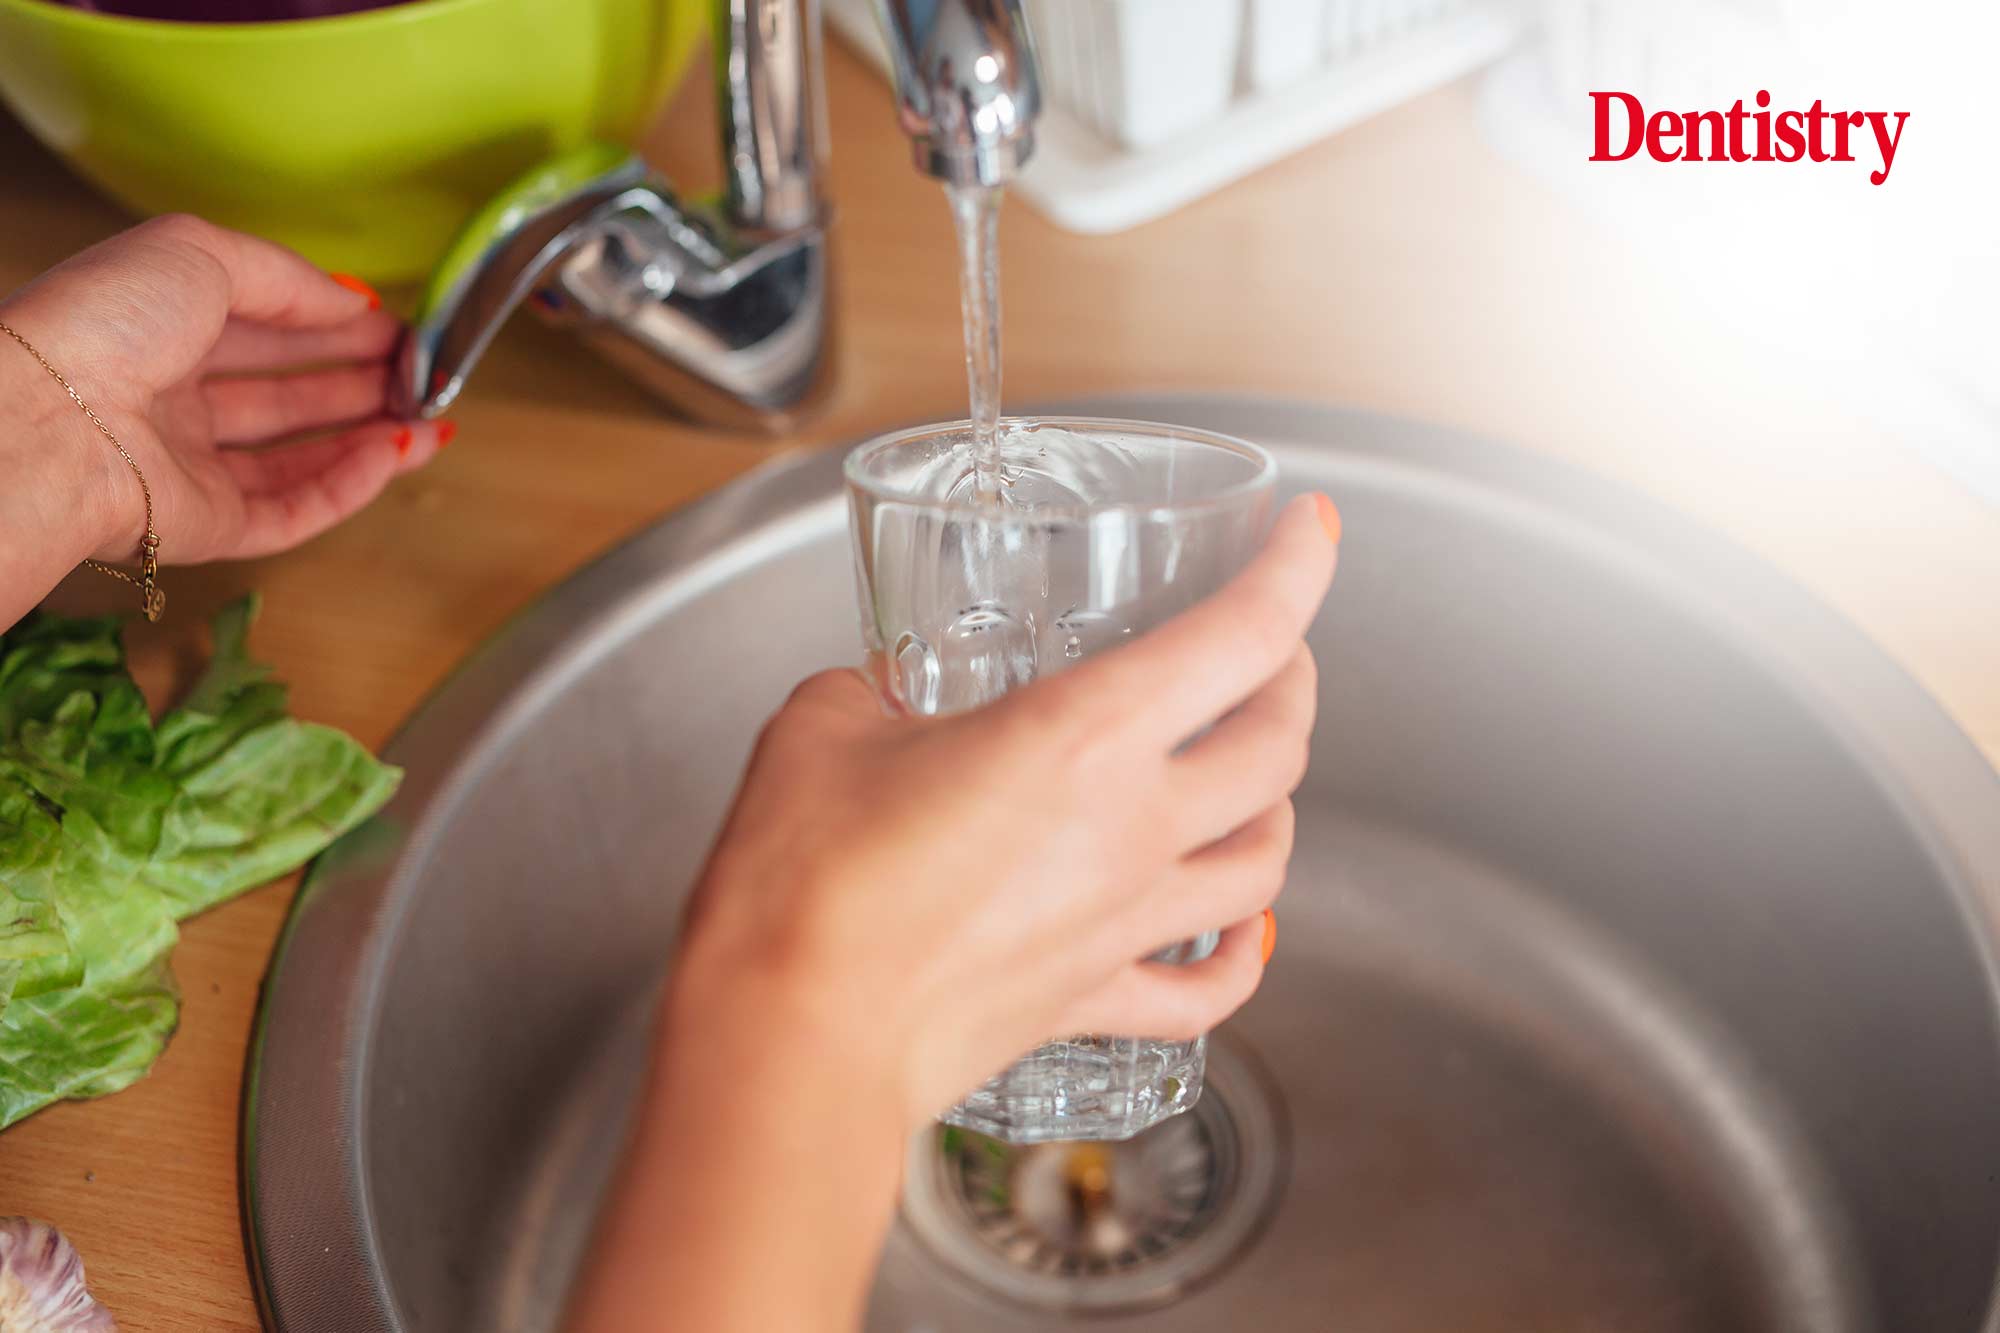 Water fluoridation has 'lowest carbon footprint' compared to other prevention tools